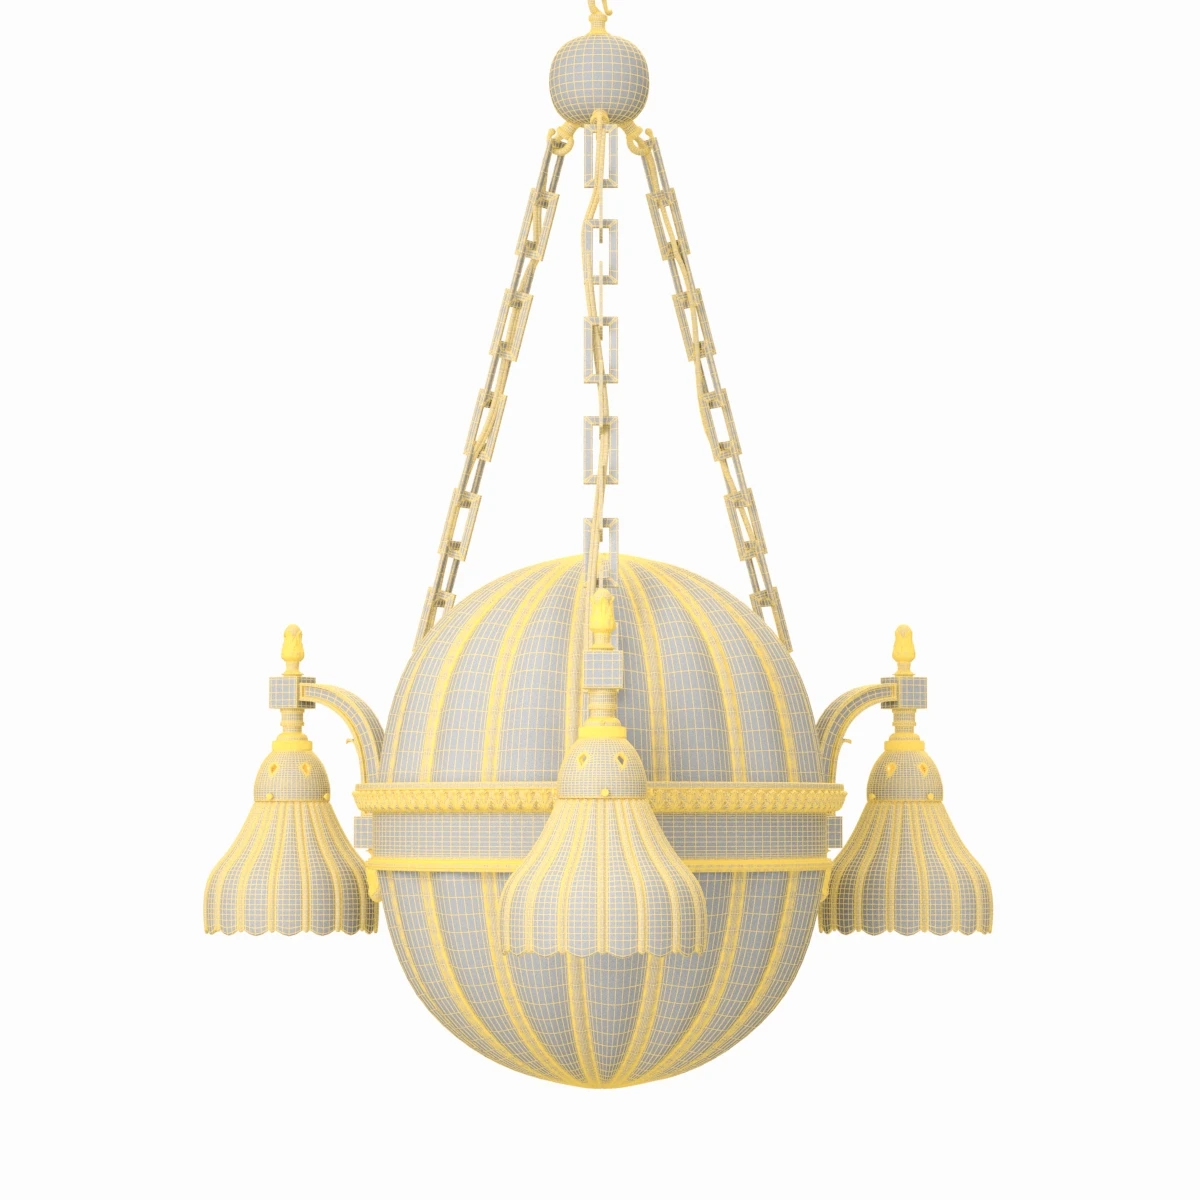 Moonstone Chandelier by Jefferson and Co England Circa 1910 3D Model_07